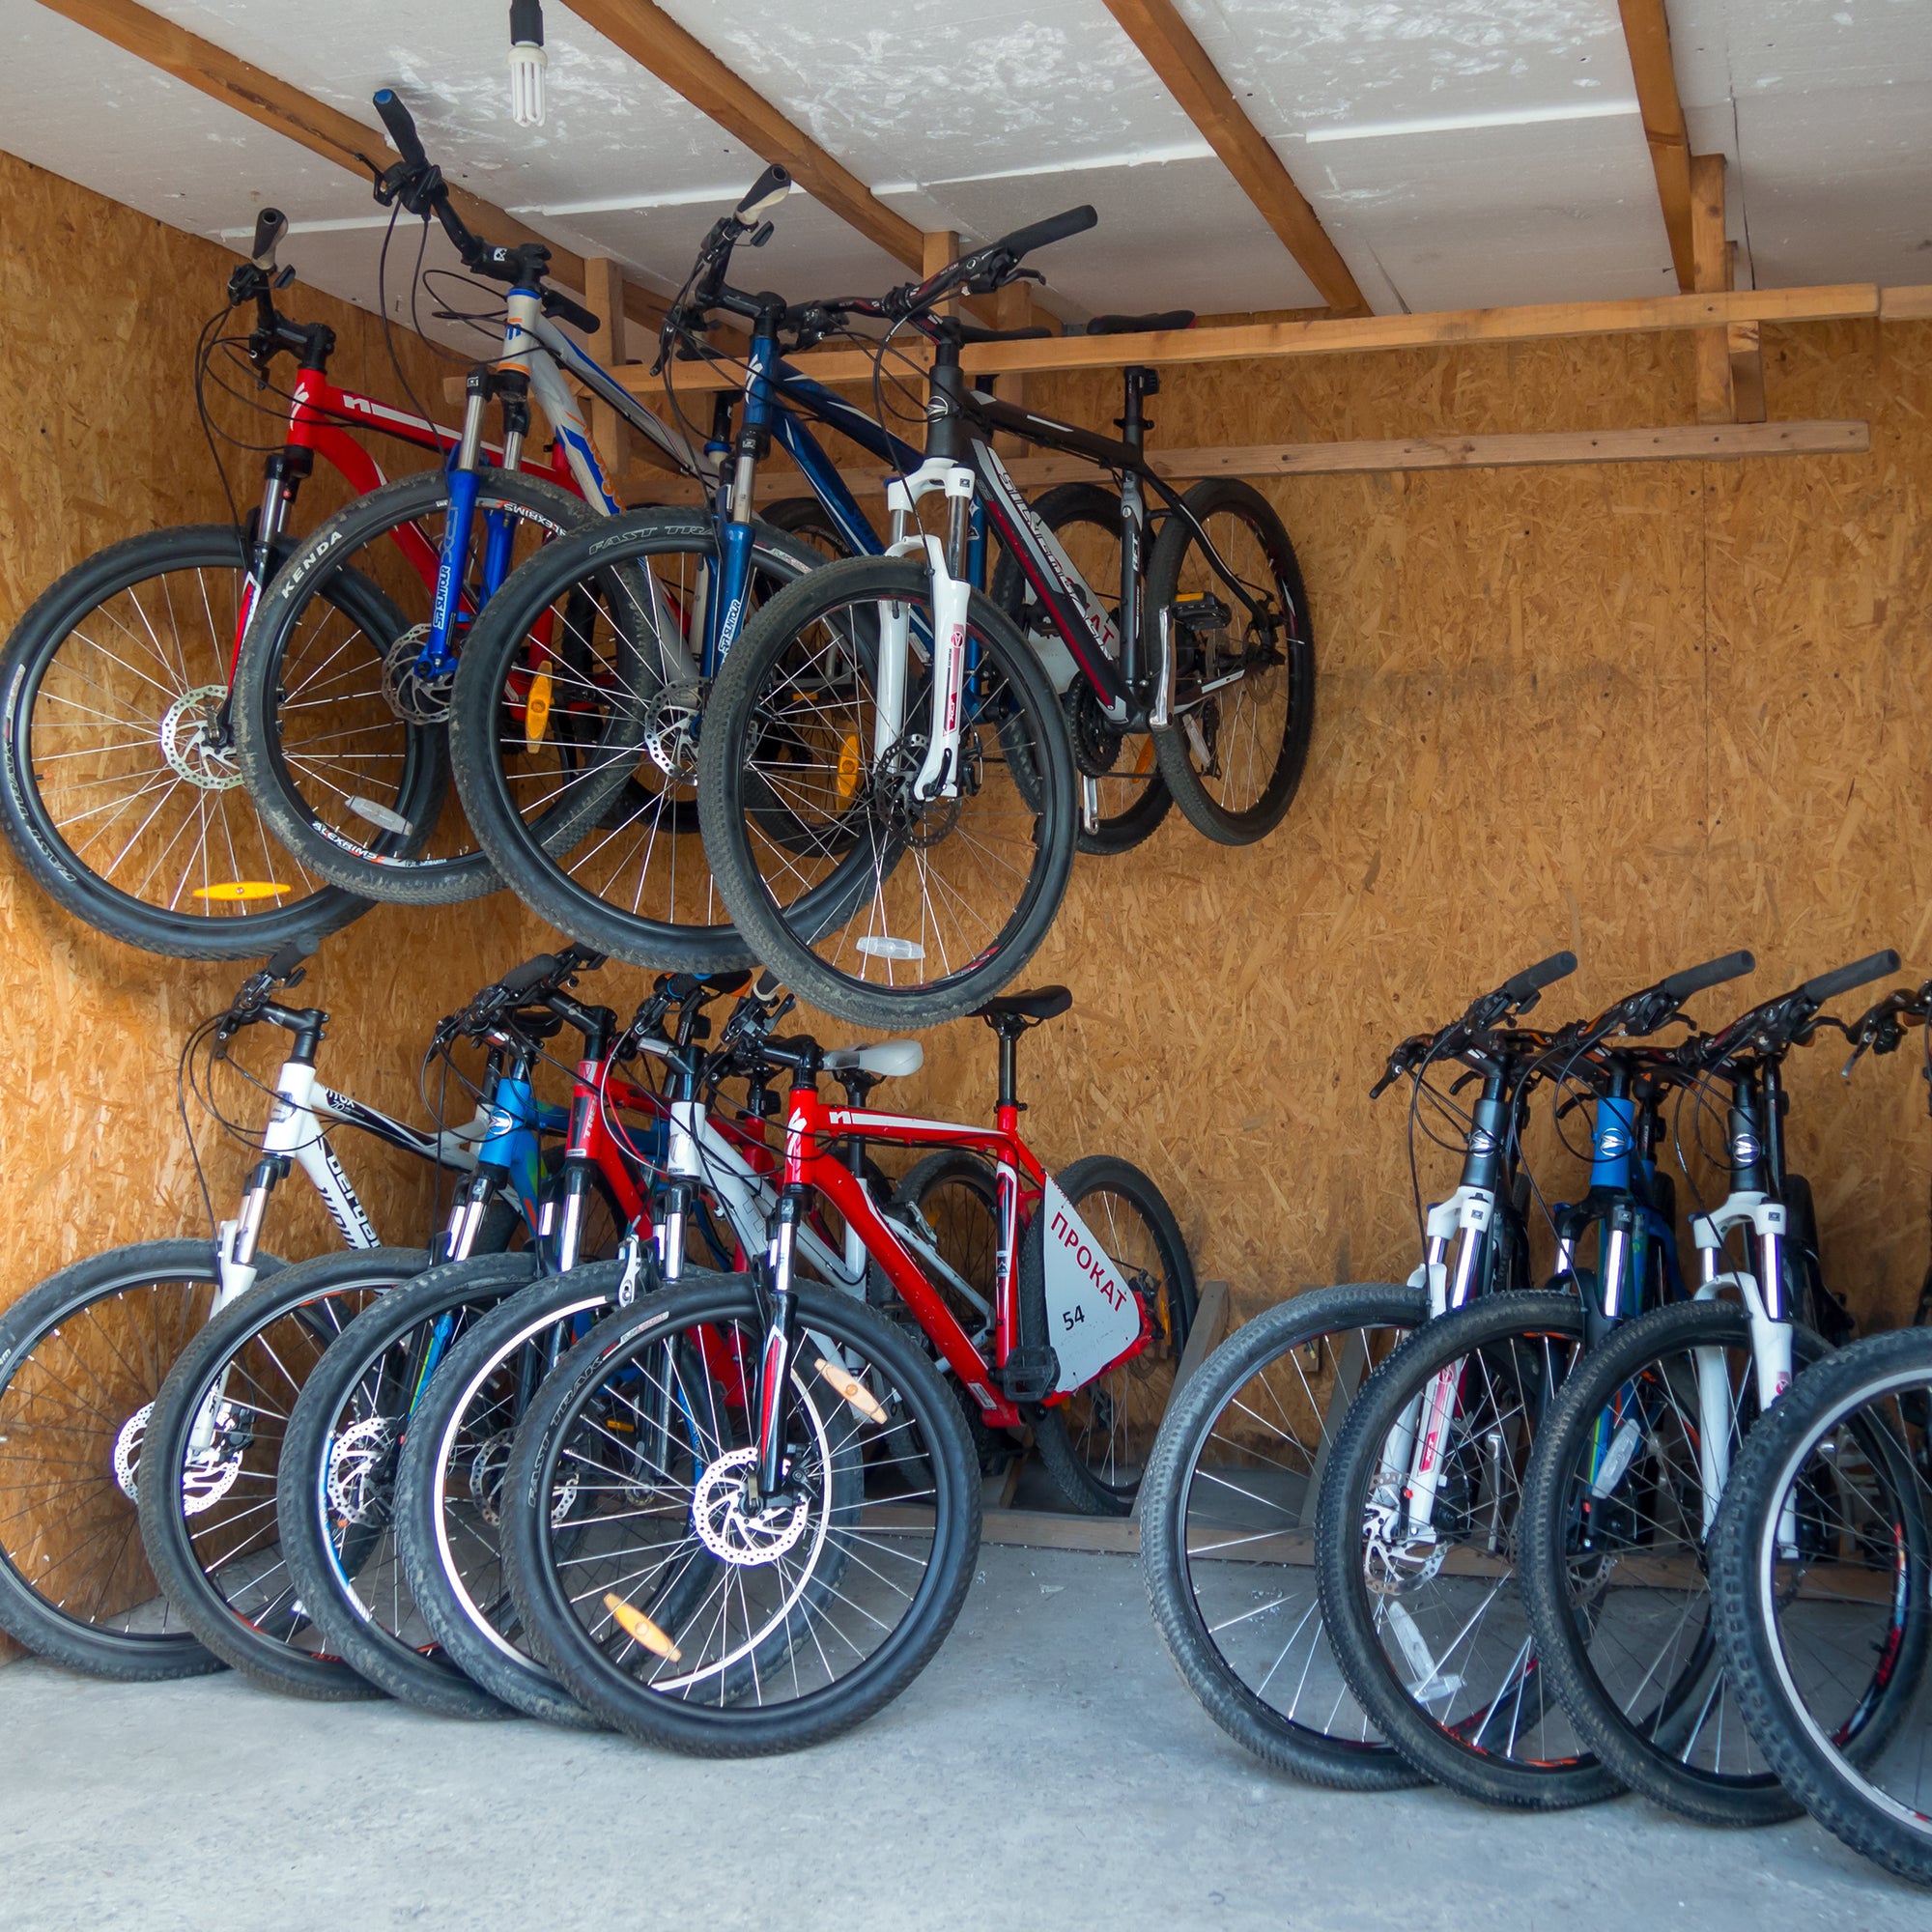 How To Store Your Bike Indoors